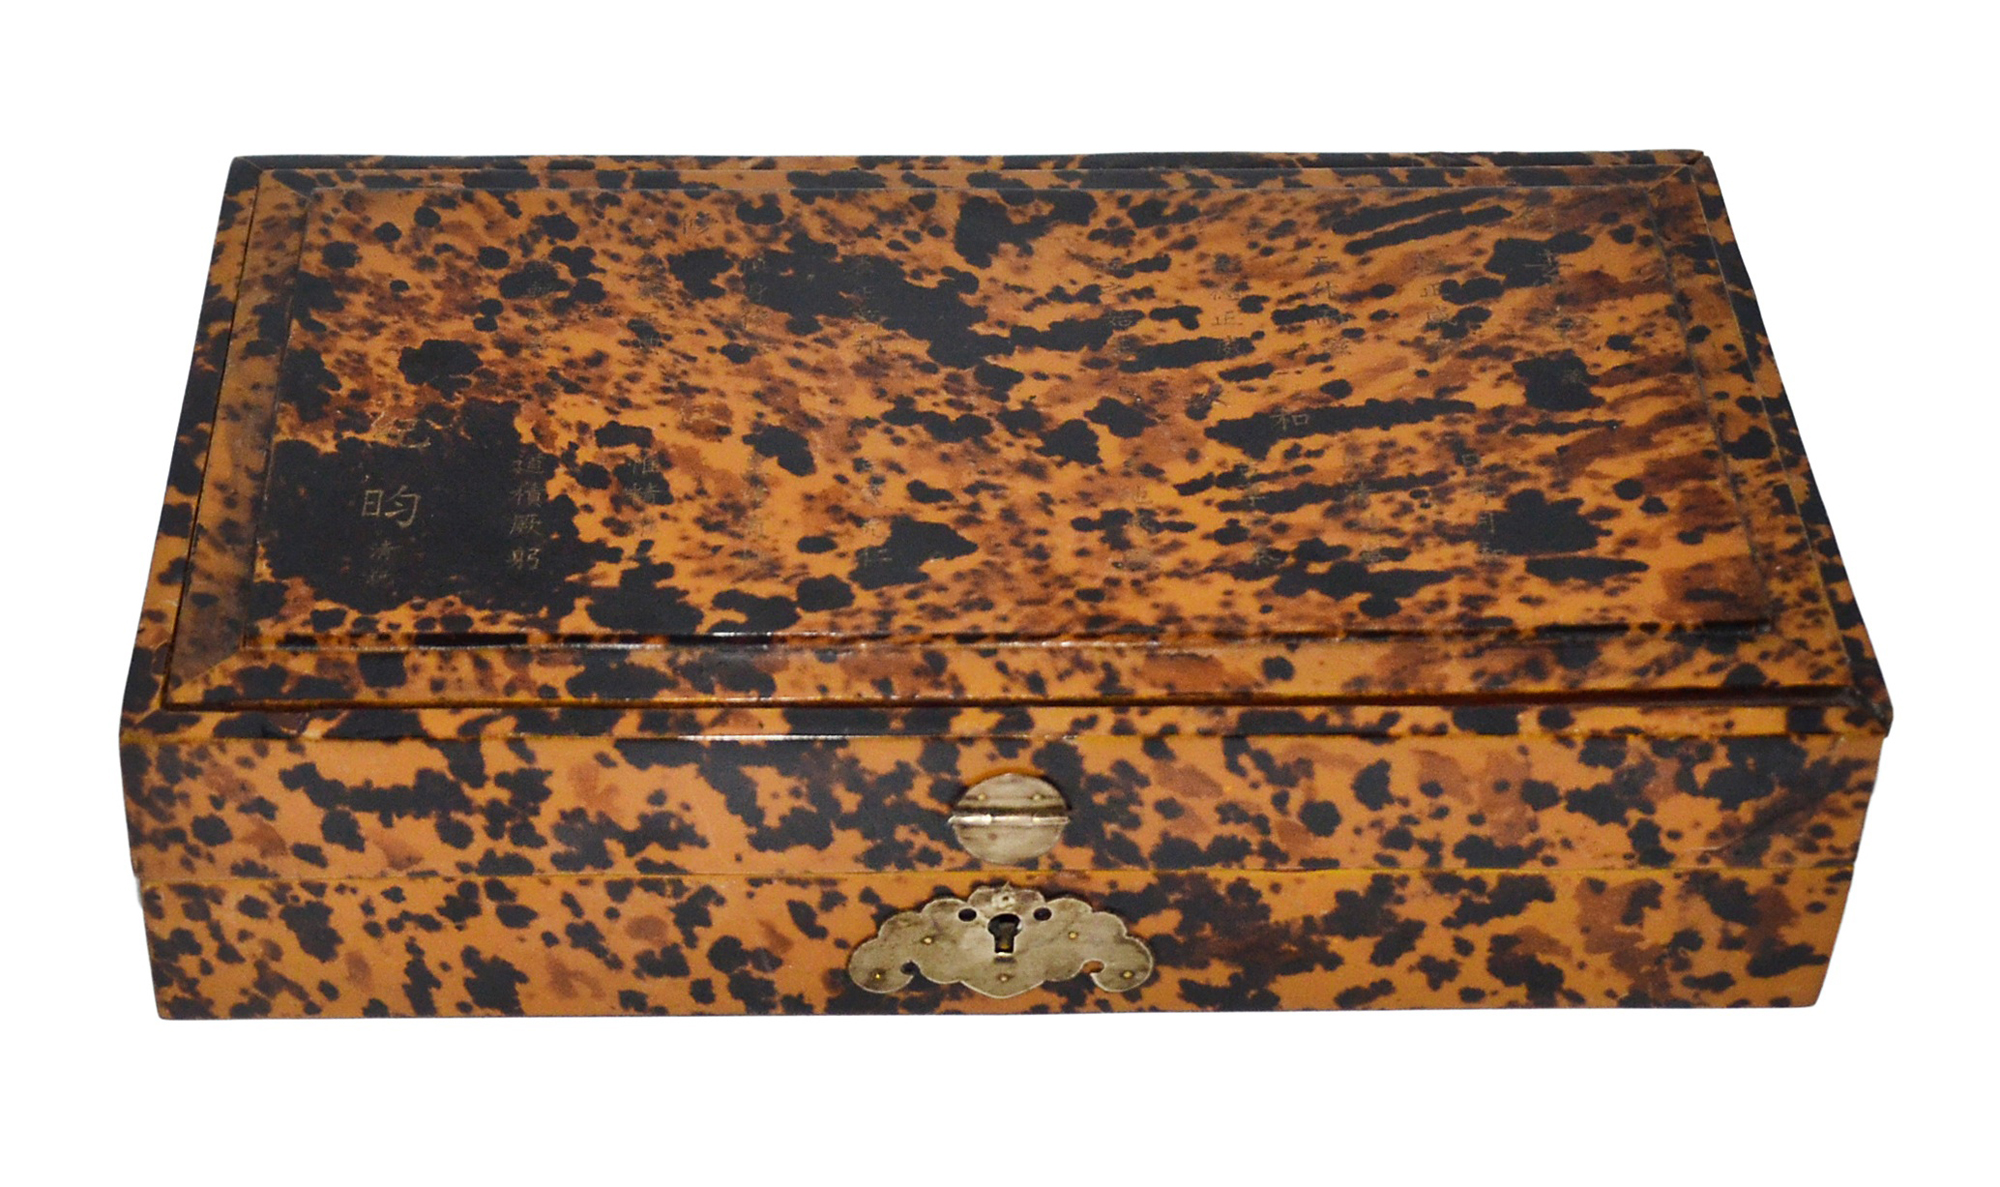 A rectangular Ji-Yun tortoiseshell box of the Qing Dynasty with poem inscribed in gilt on the top. It has a Jiaping four-character mark. Estimate: $5,000-$8,000. Gianguan Auctions image